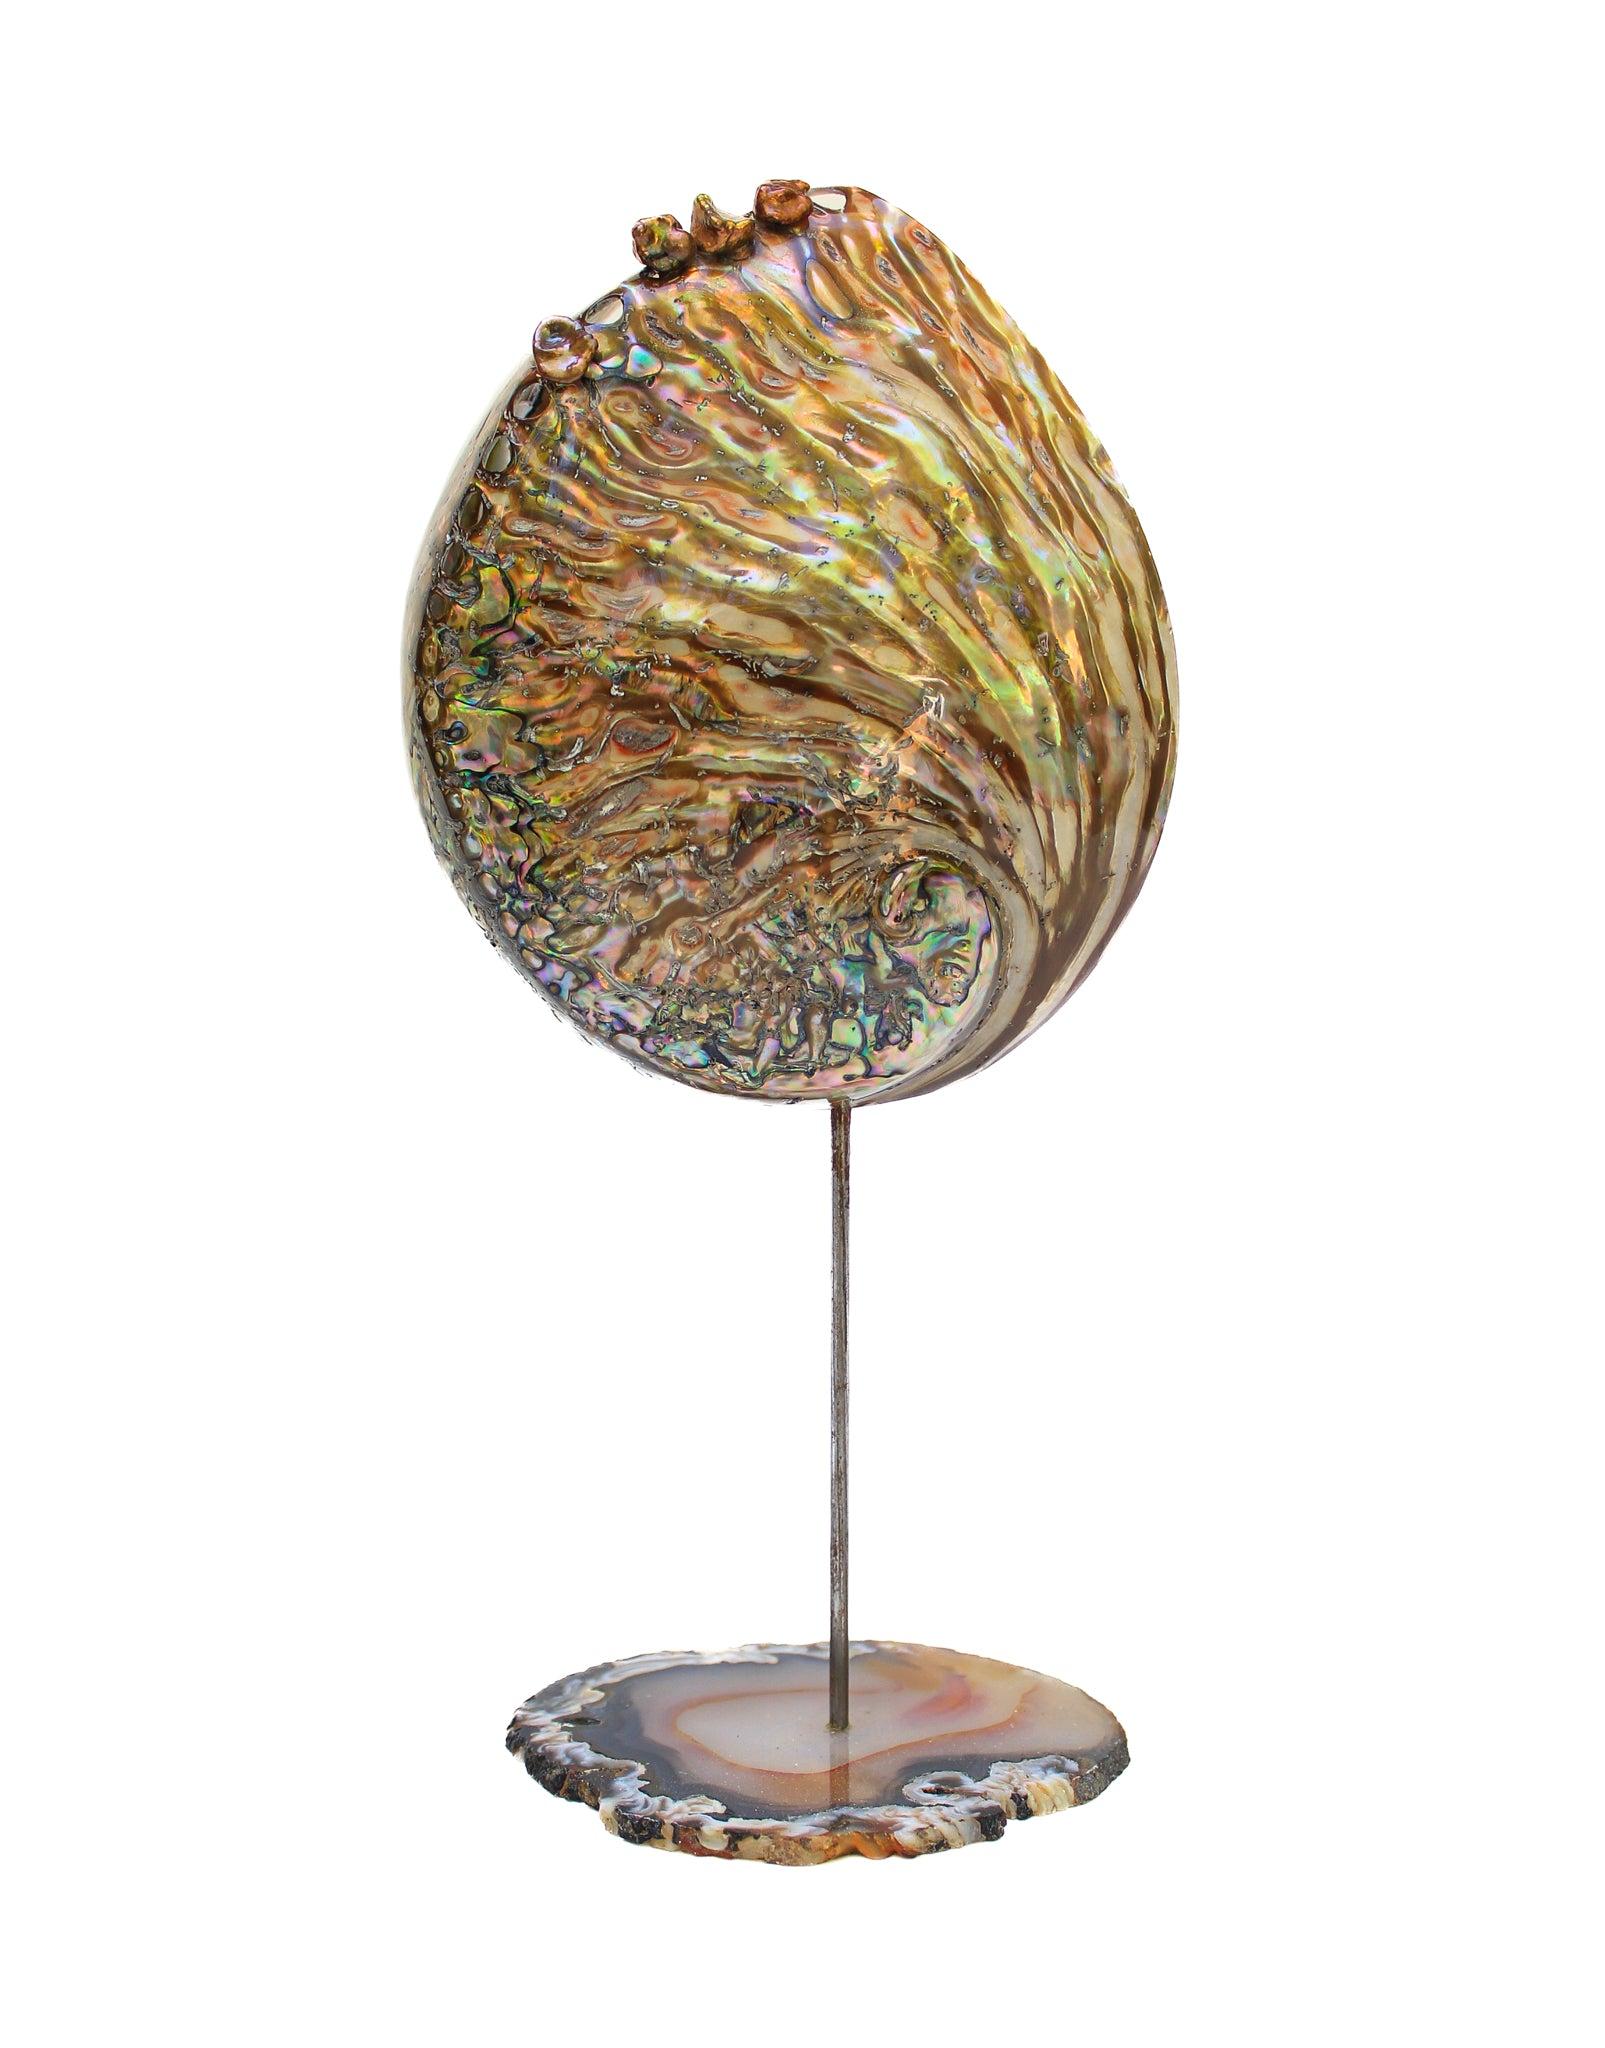 Polished Abalone (Haliotis Iris) shell with natural forming baroque pearls mounted on a metal rod on a polished agate base. The iridescent, multi-colored shell coordinates perfectly with the baroque pearls and polished agate slice. The elements